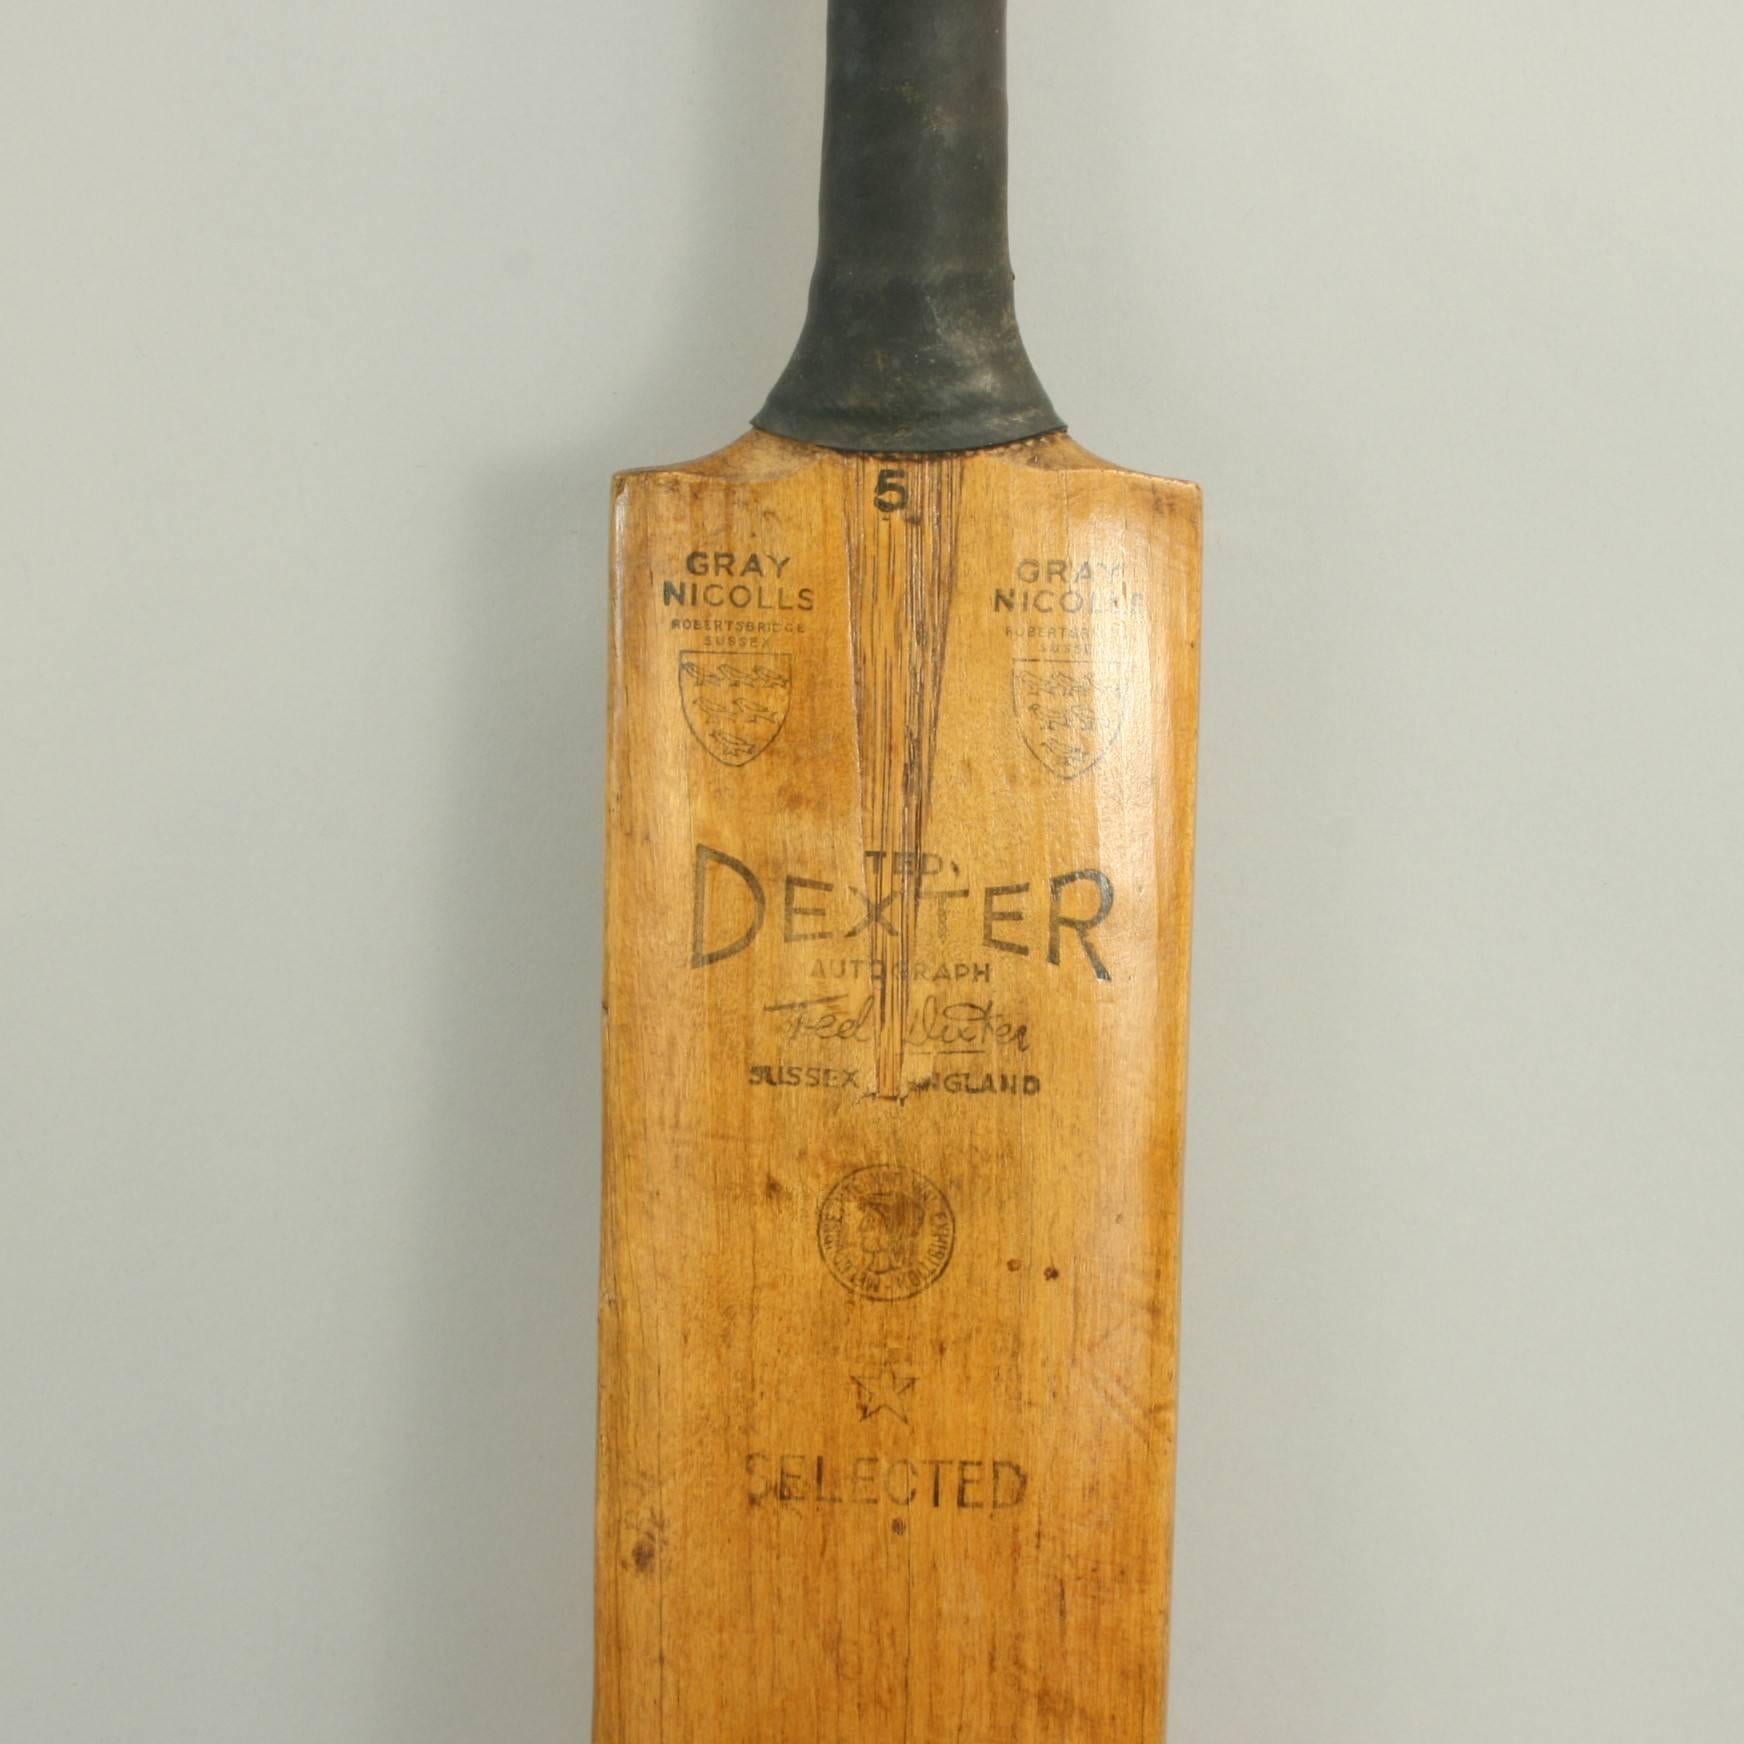 A good willow cricket bat stamped on the face with a facsimile autograph of Ted Dexter with the Gray Nicolls trade mark shield. A nice clean bat with a rubber grip but the blade does have a crack in the front. 
 
Edward Ralph Dexter CBE, known as